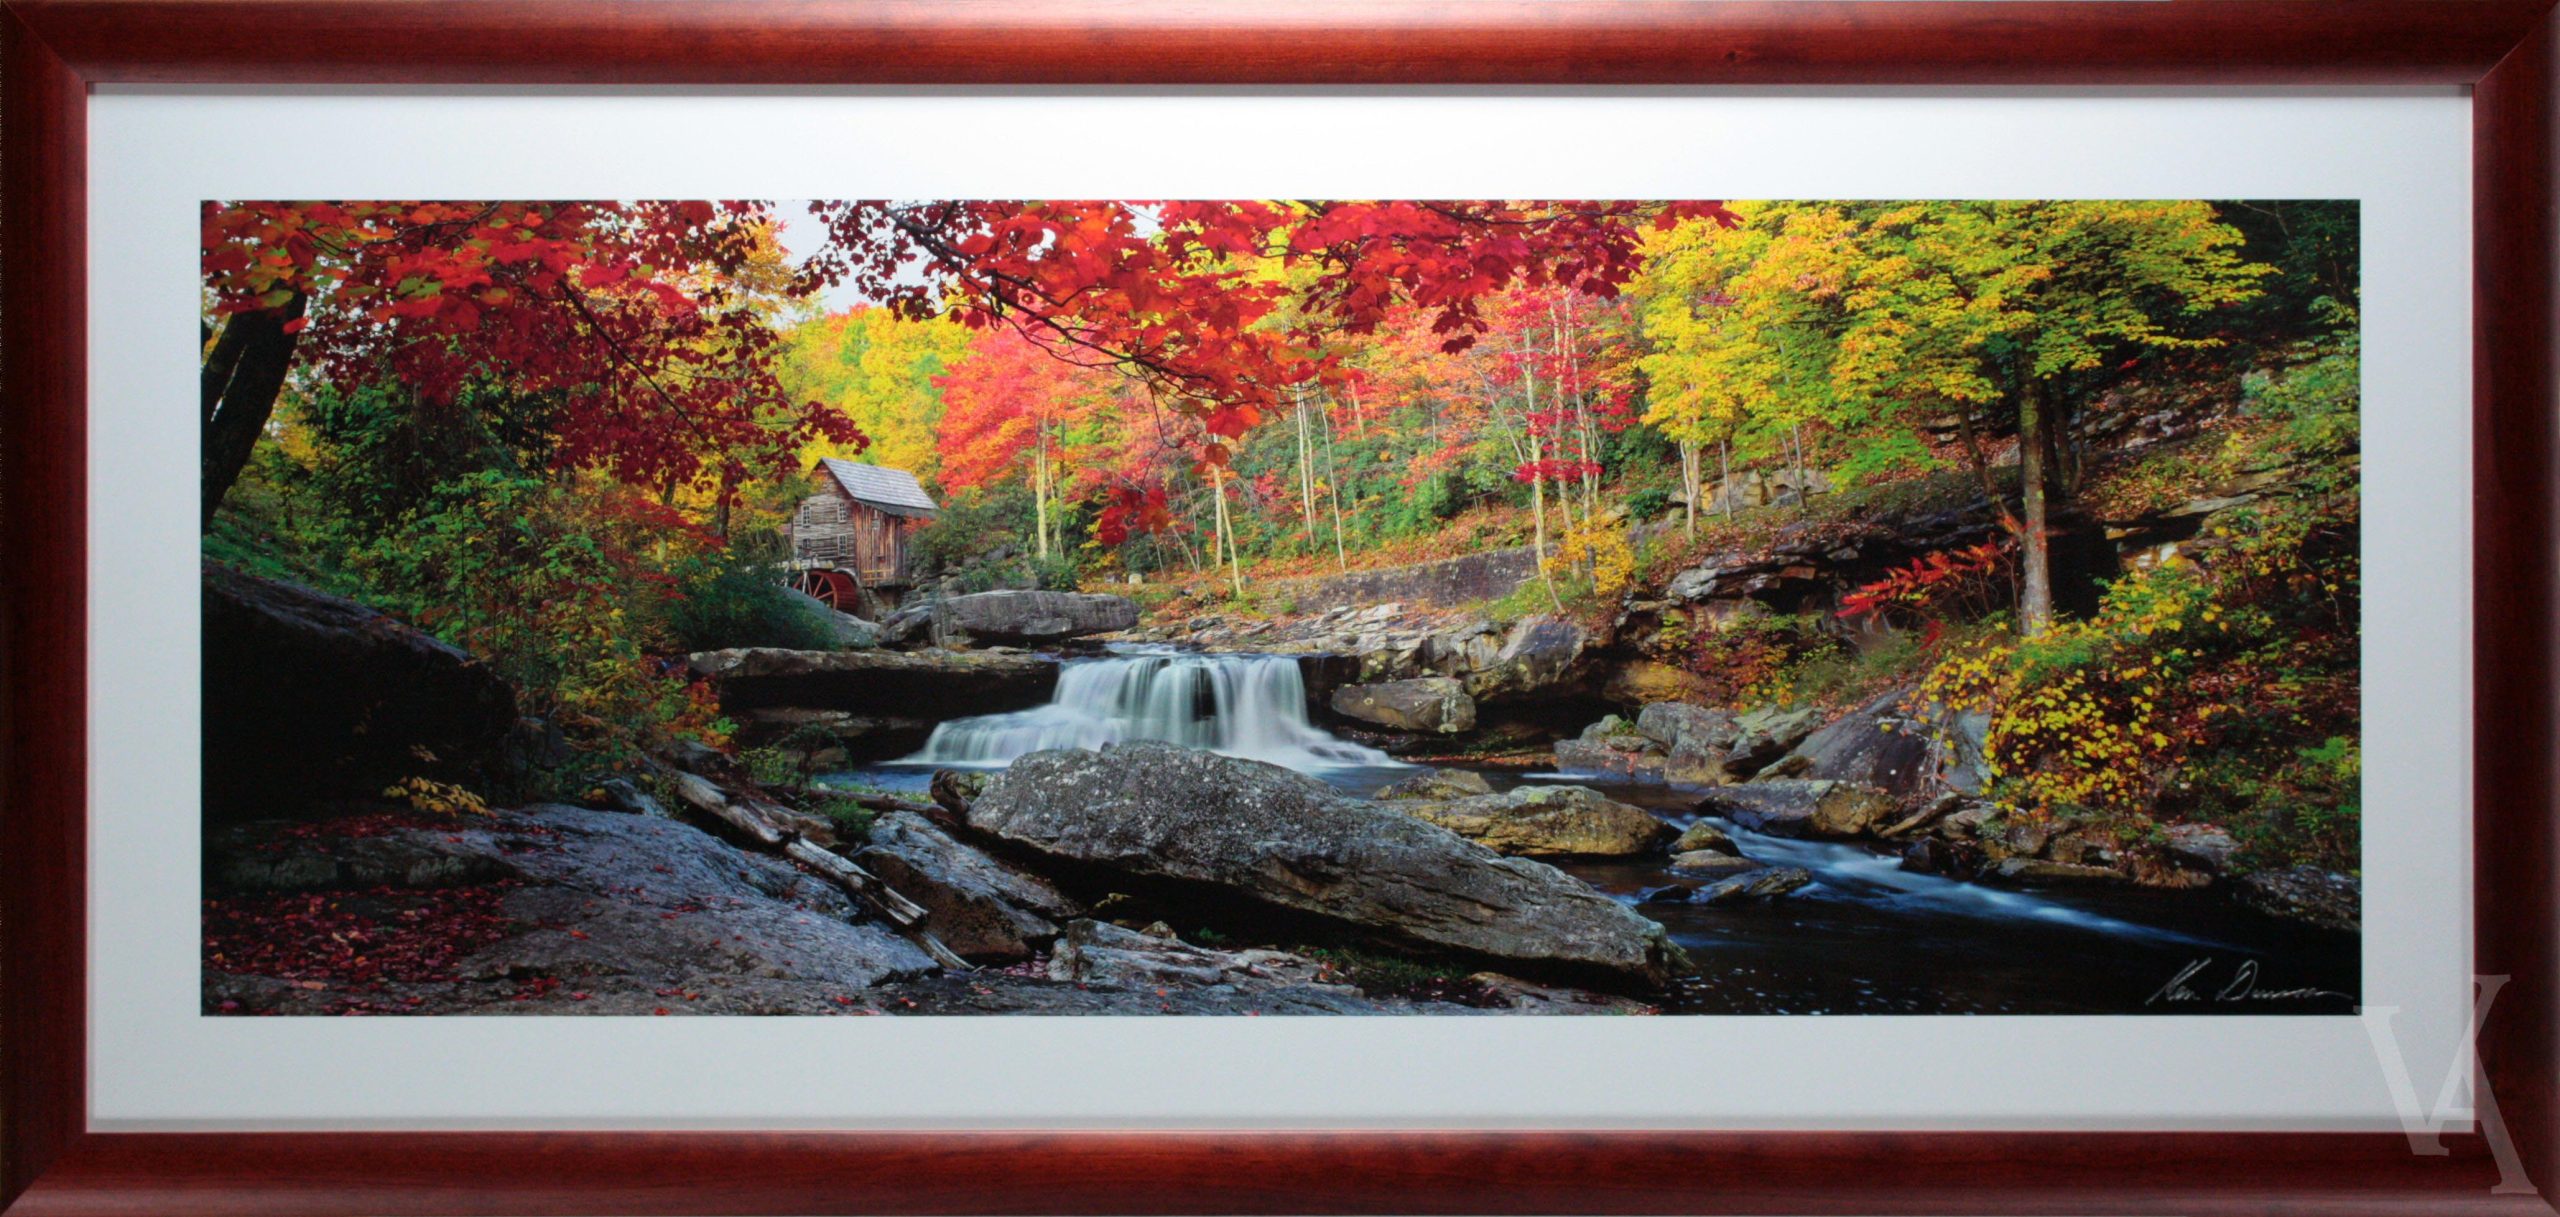 Ken Duncan Photography Framed Signature Series Art Print. Glade Creek Grist Mill Panoramic Signed Photo.